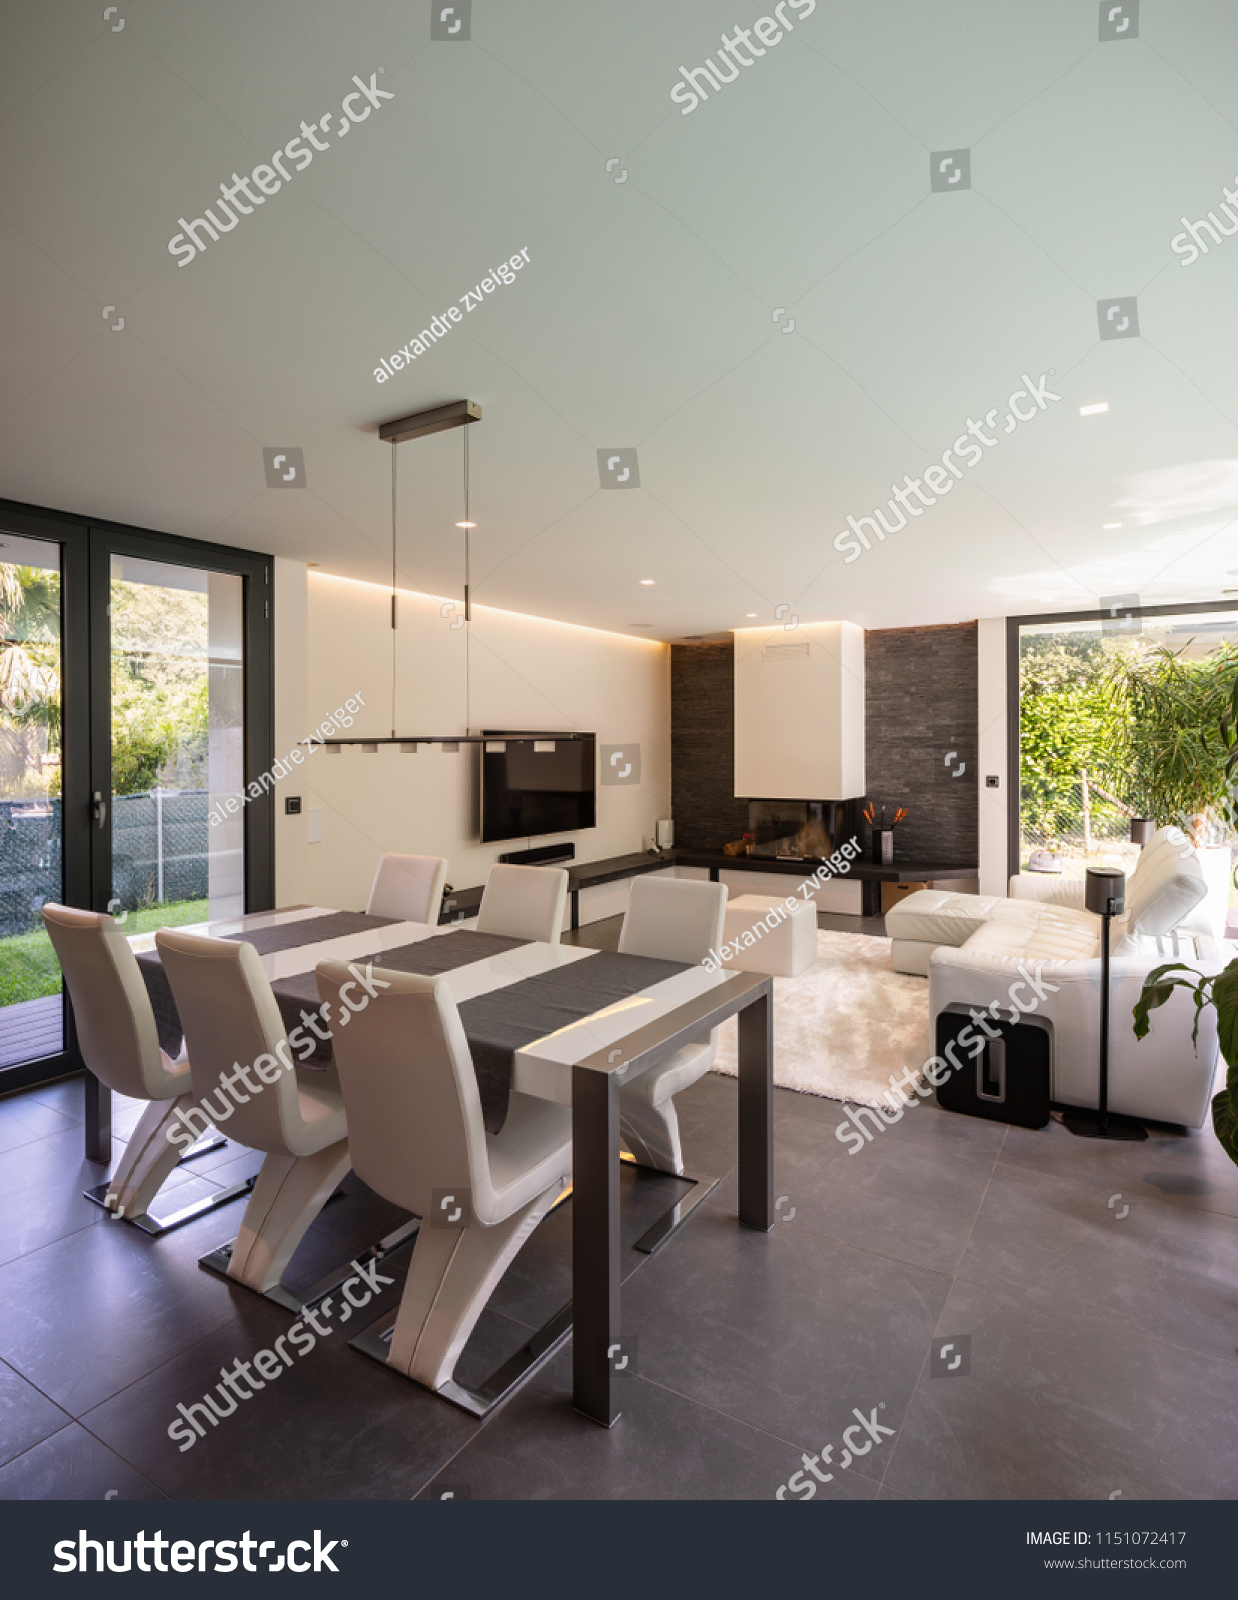 Modern living room overlooking the garden and swimming pool. Nobody inside #1151072417